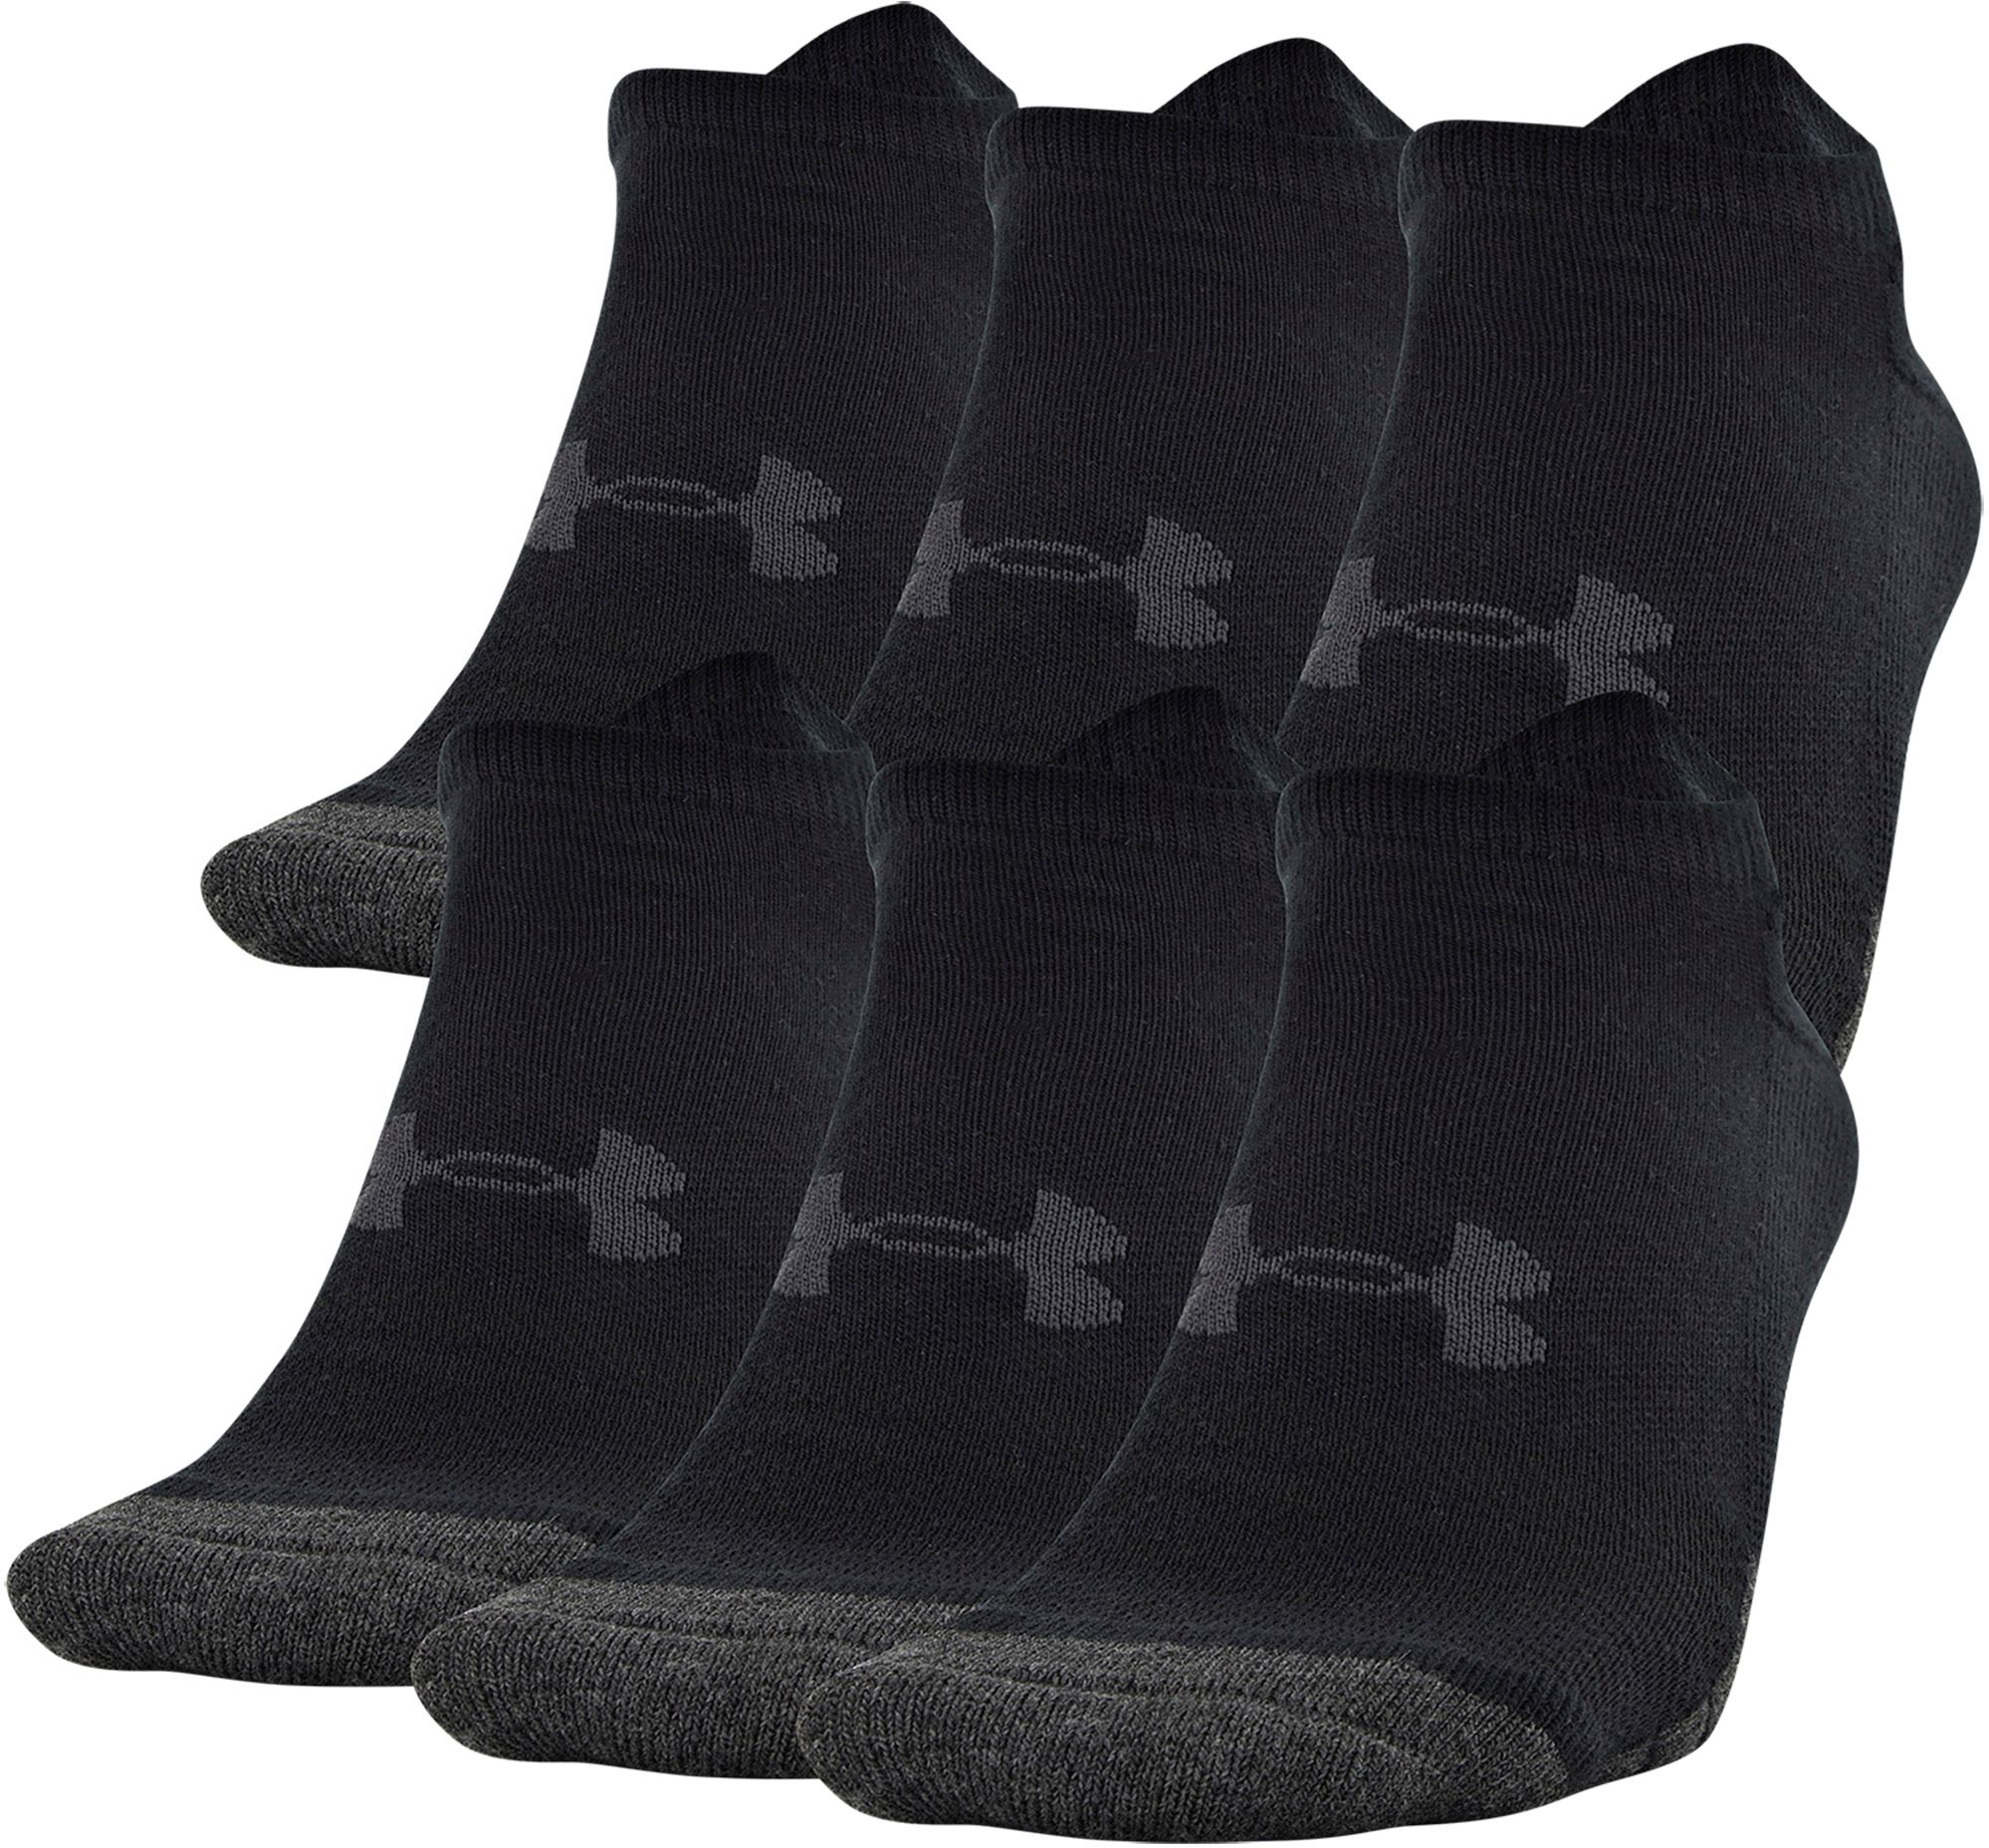 Under Armour Adult Performance Tech No Show Socks - 6 Pack